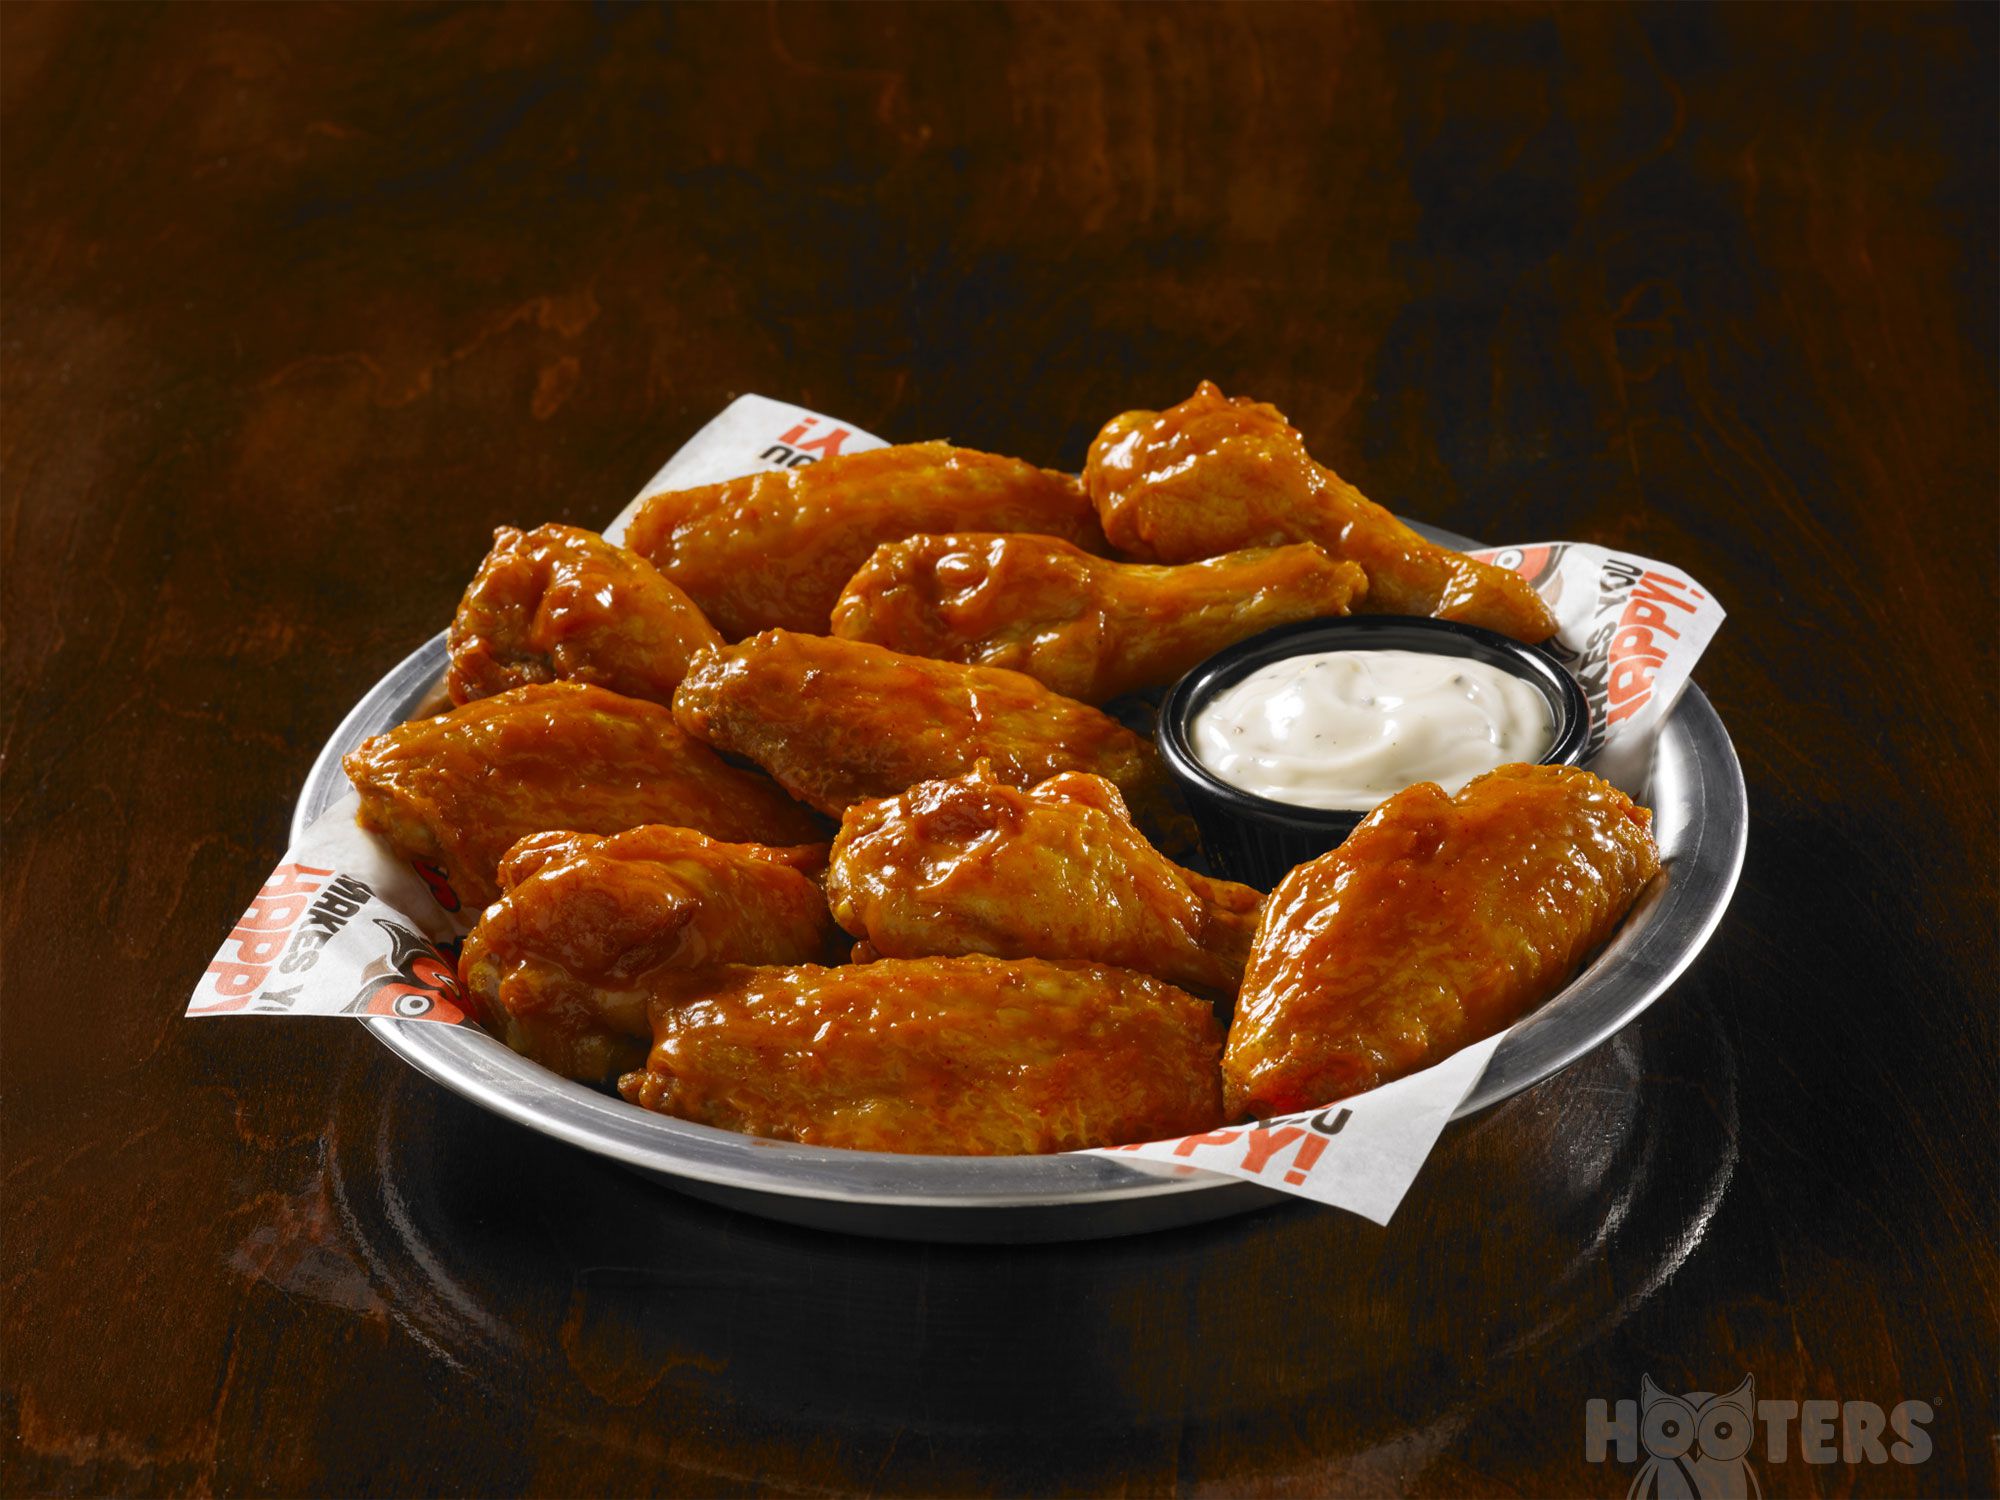 How many calories are in Hooters wings?